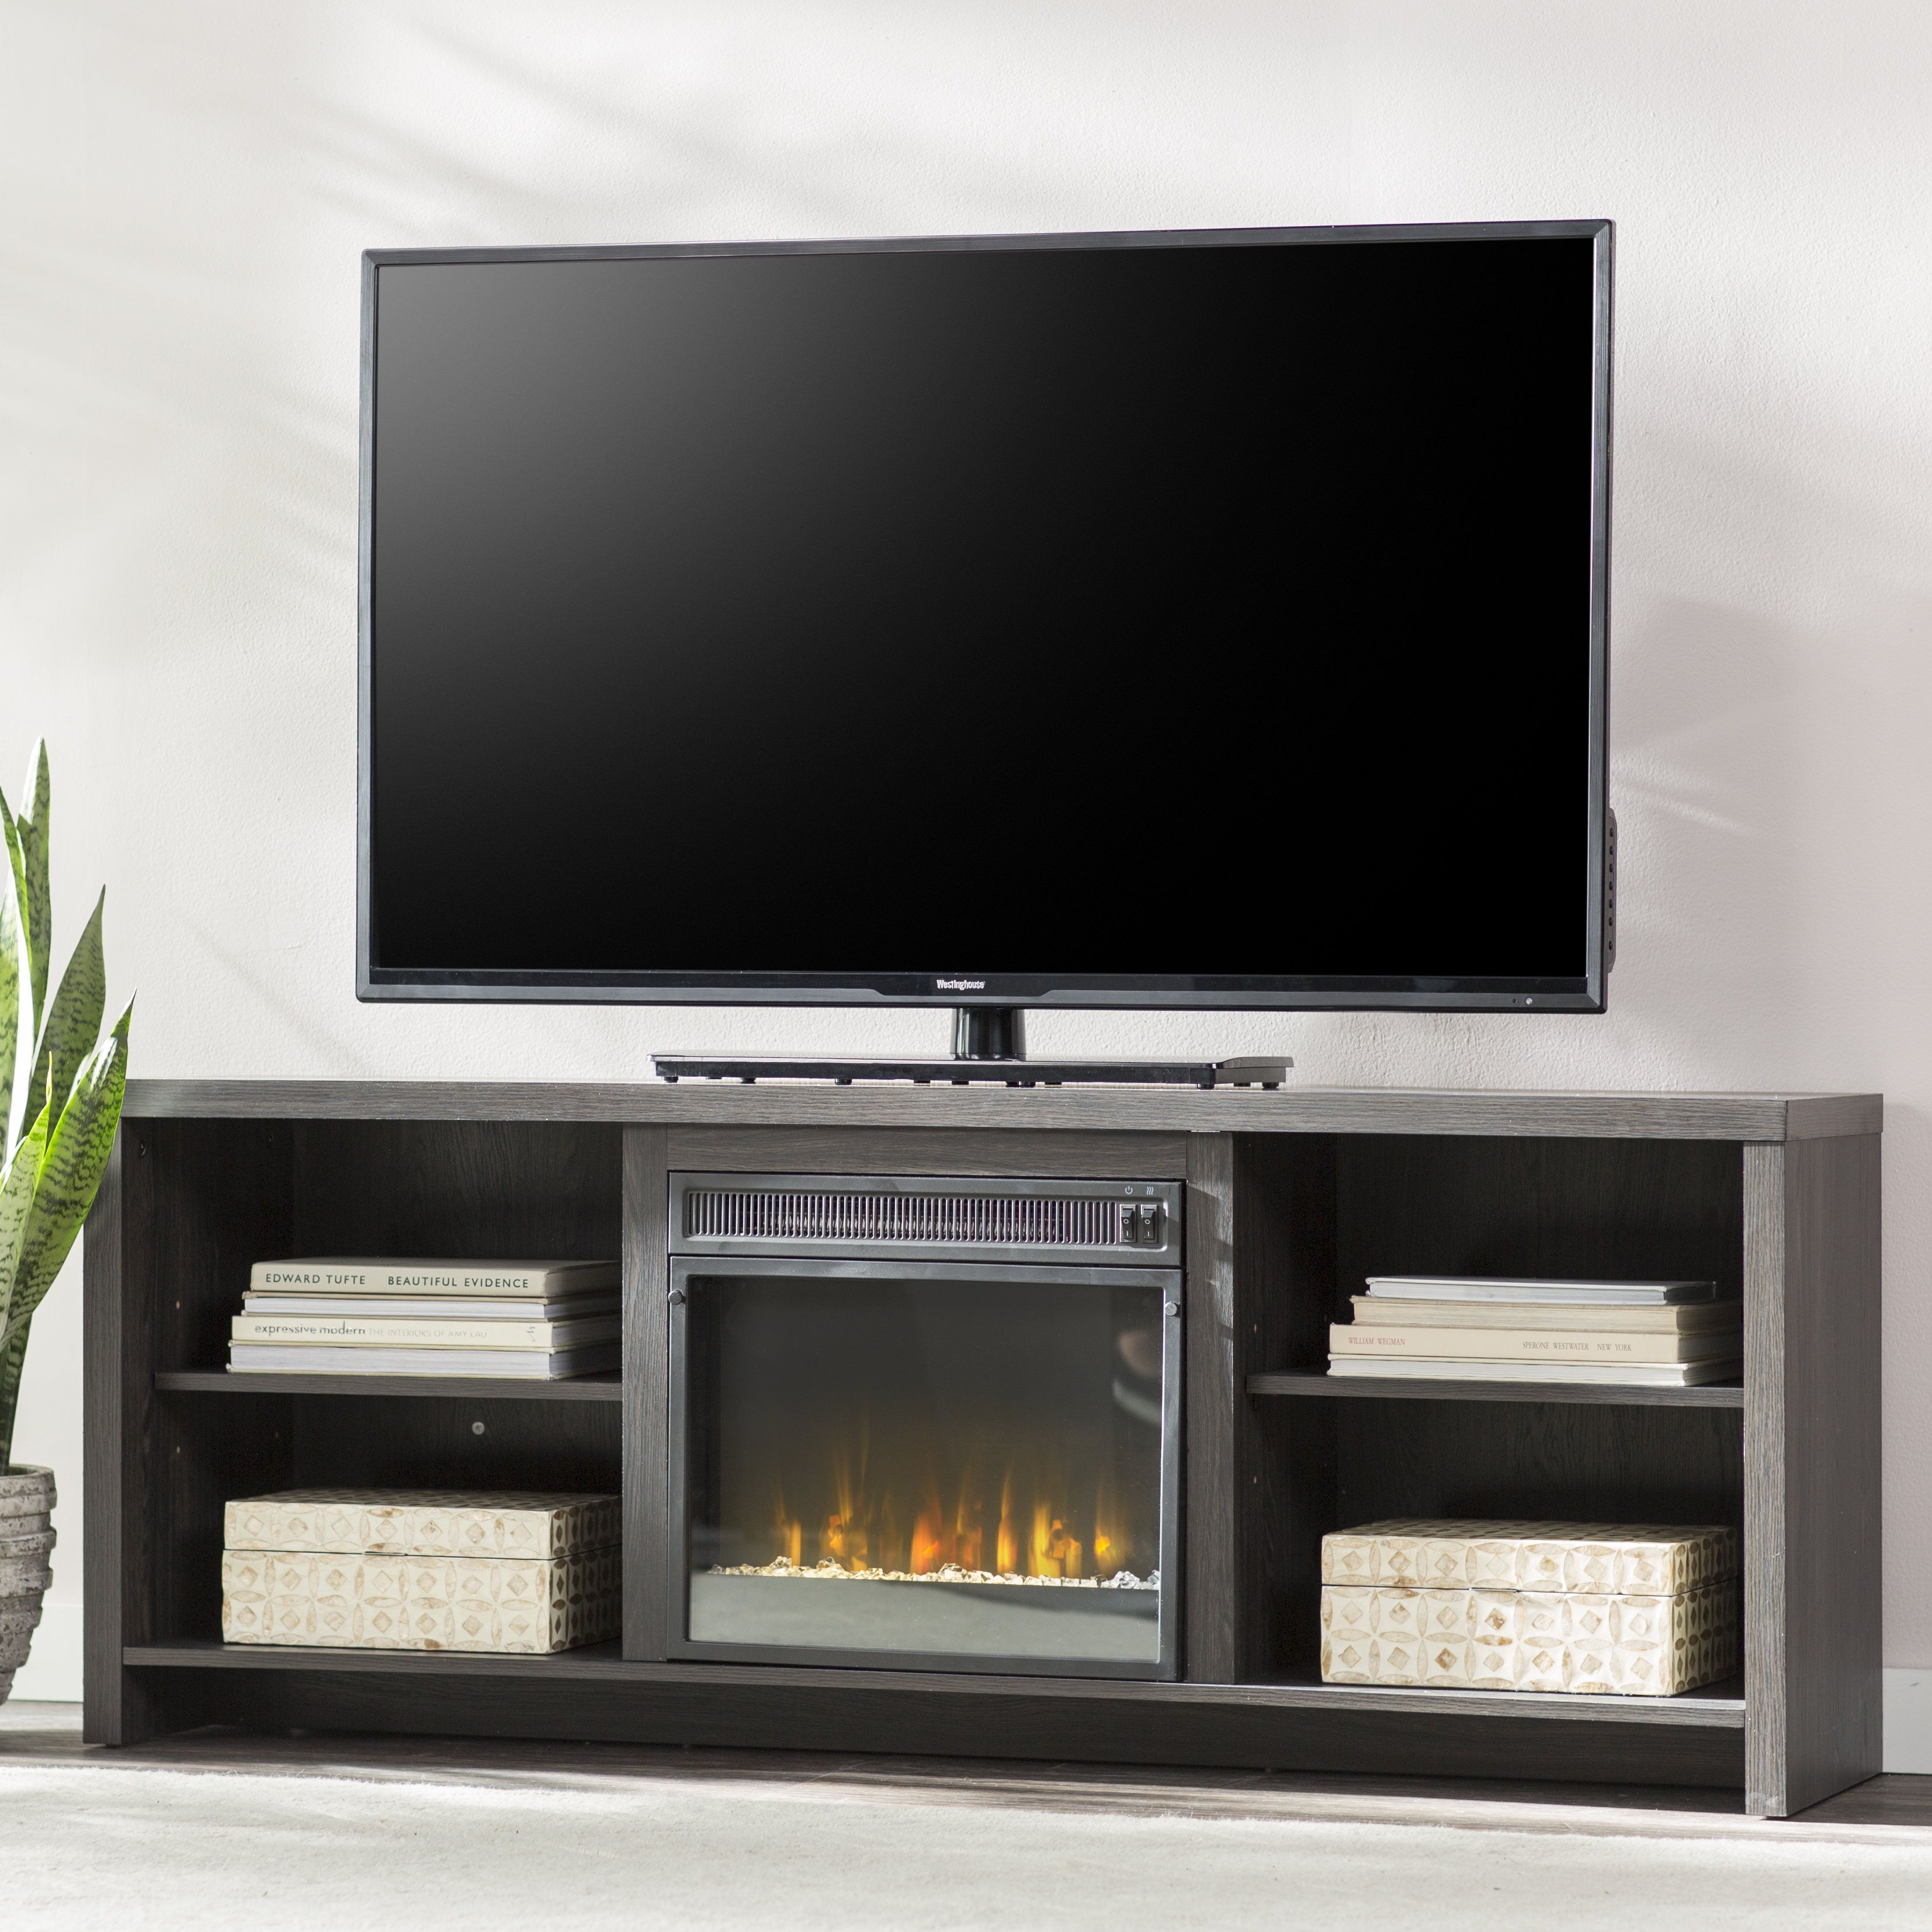 Fireplace Tv Stands & Entertainment Centers You'll Love | Wayfair (View 20 of 30)